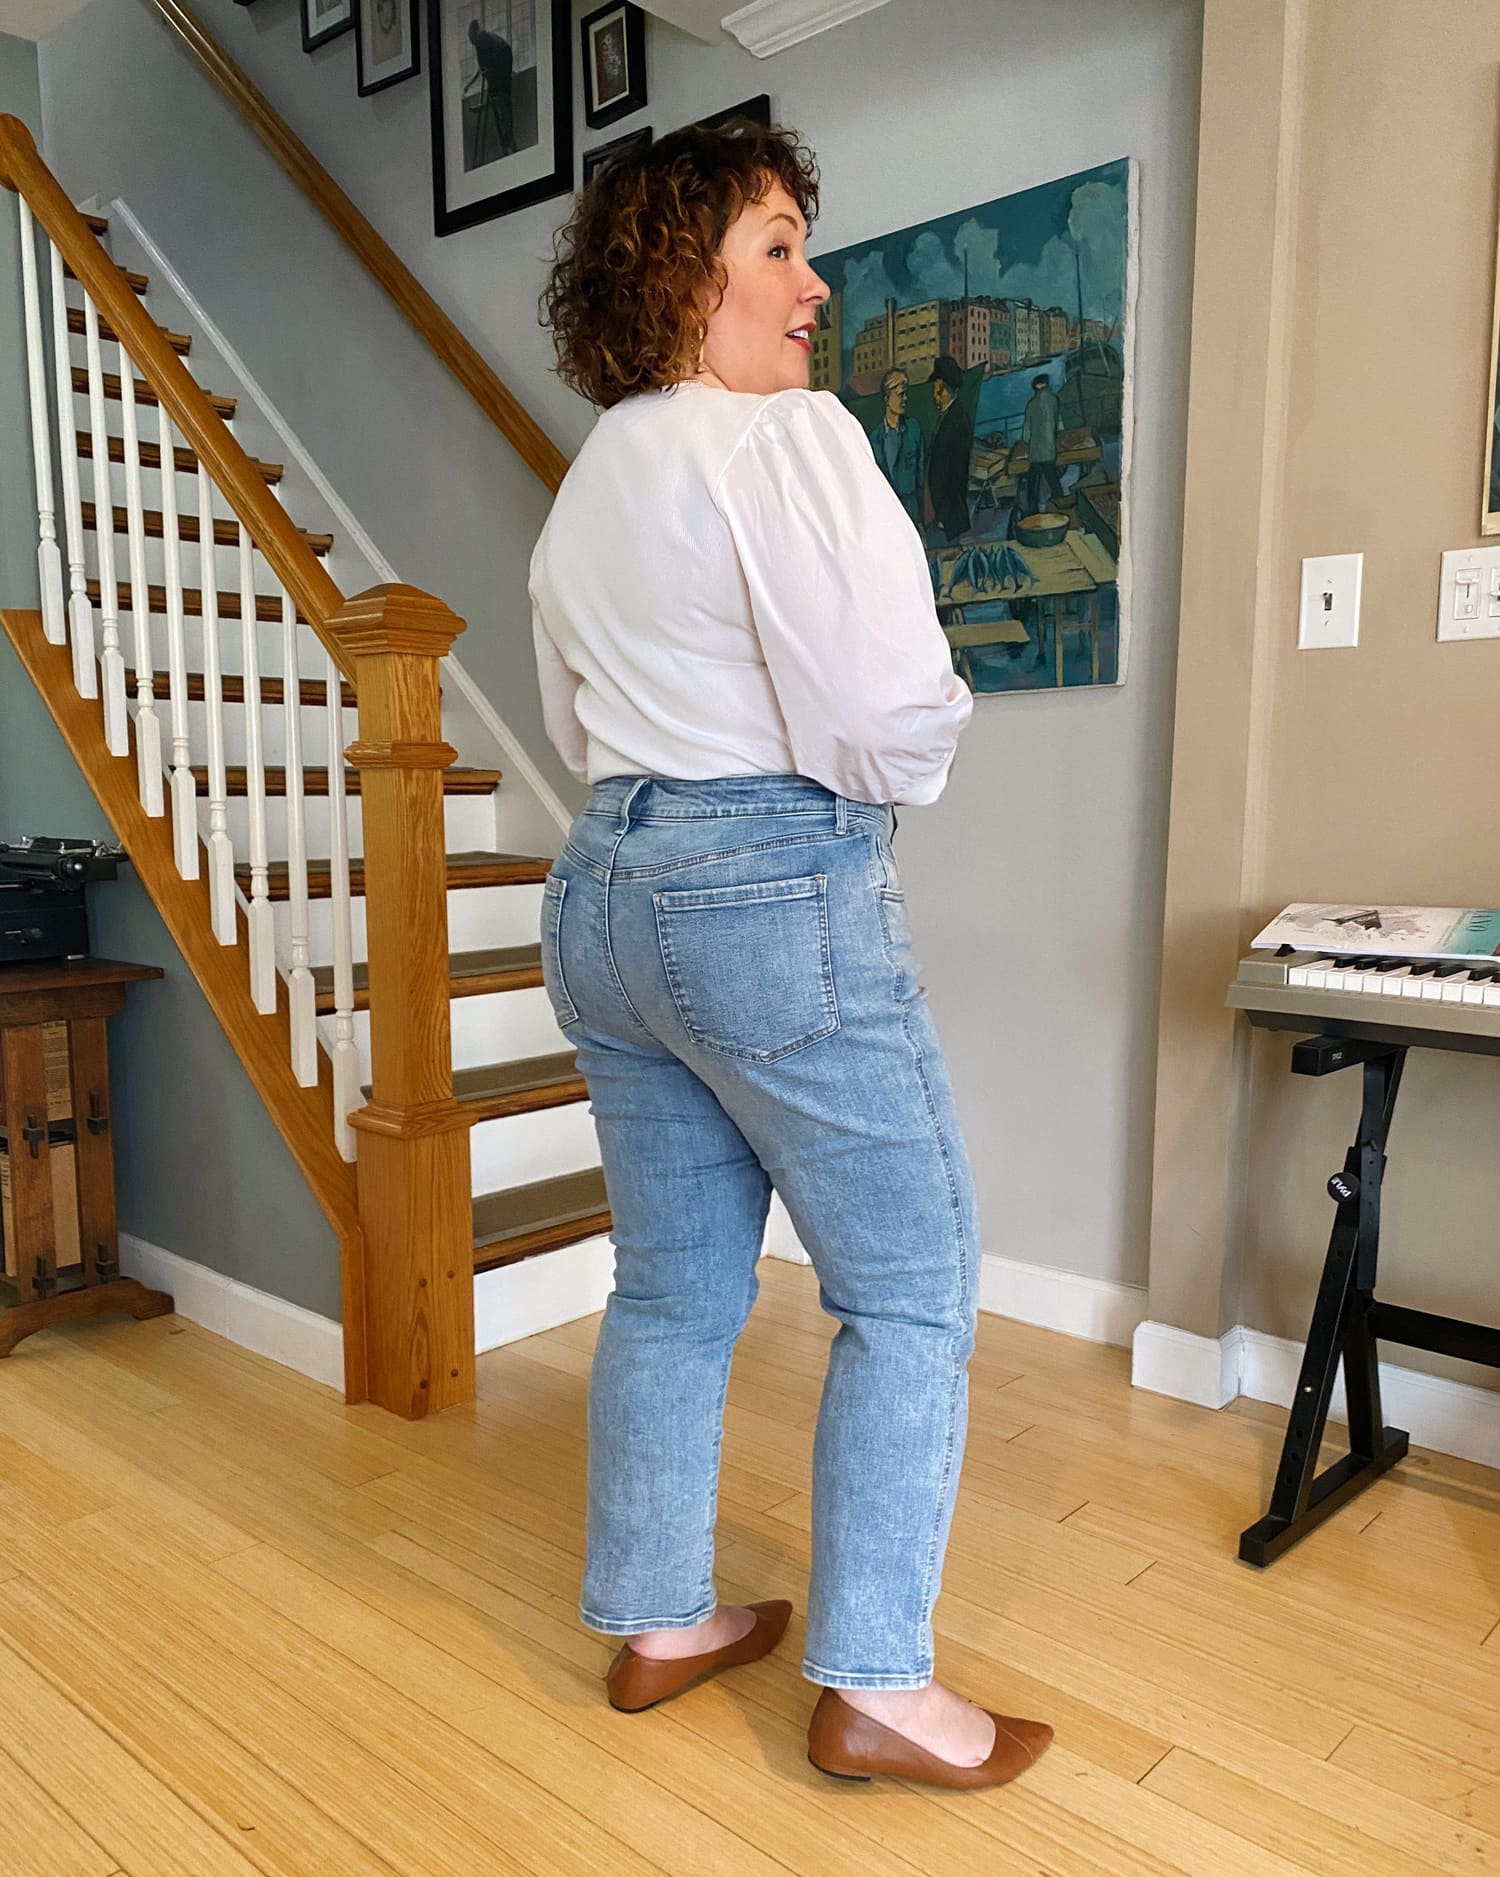 Chico’s DefineMe Denim Review: 3 Pairs Tried with Photos and Honest Thoughts